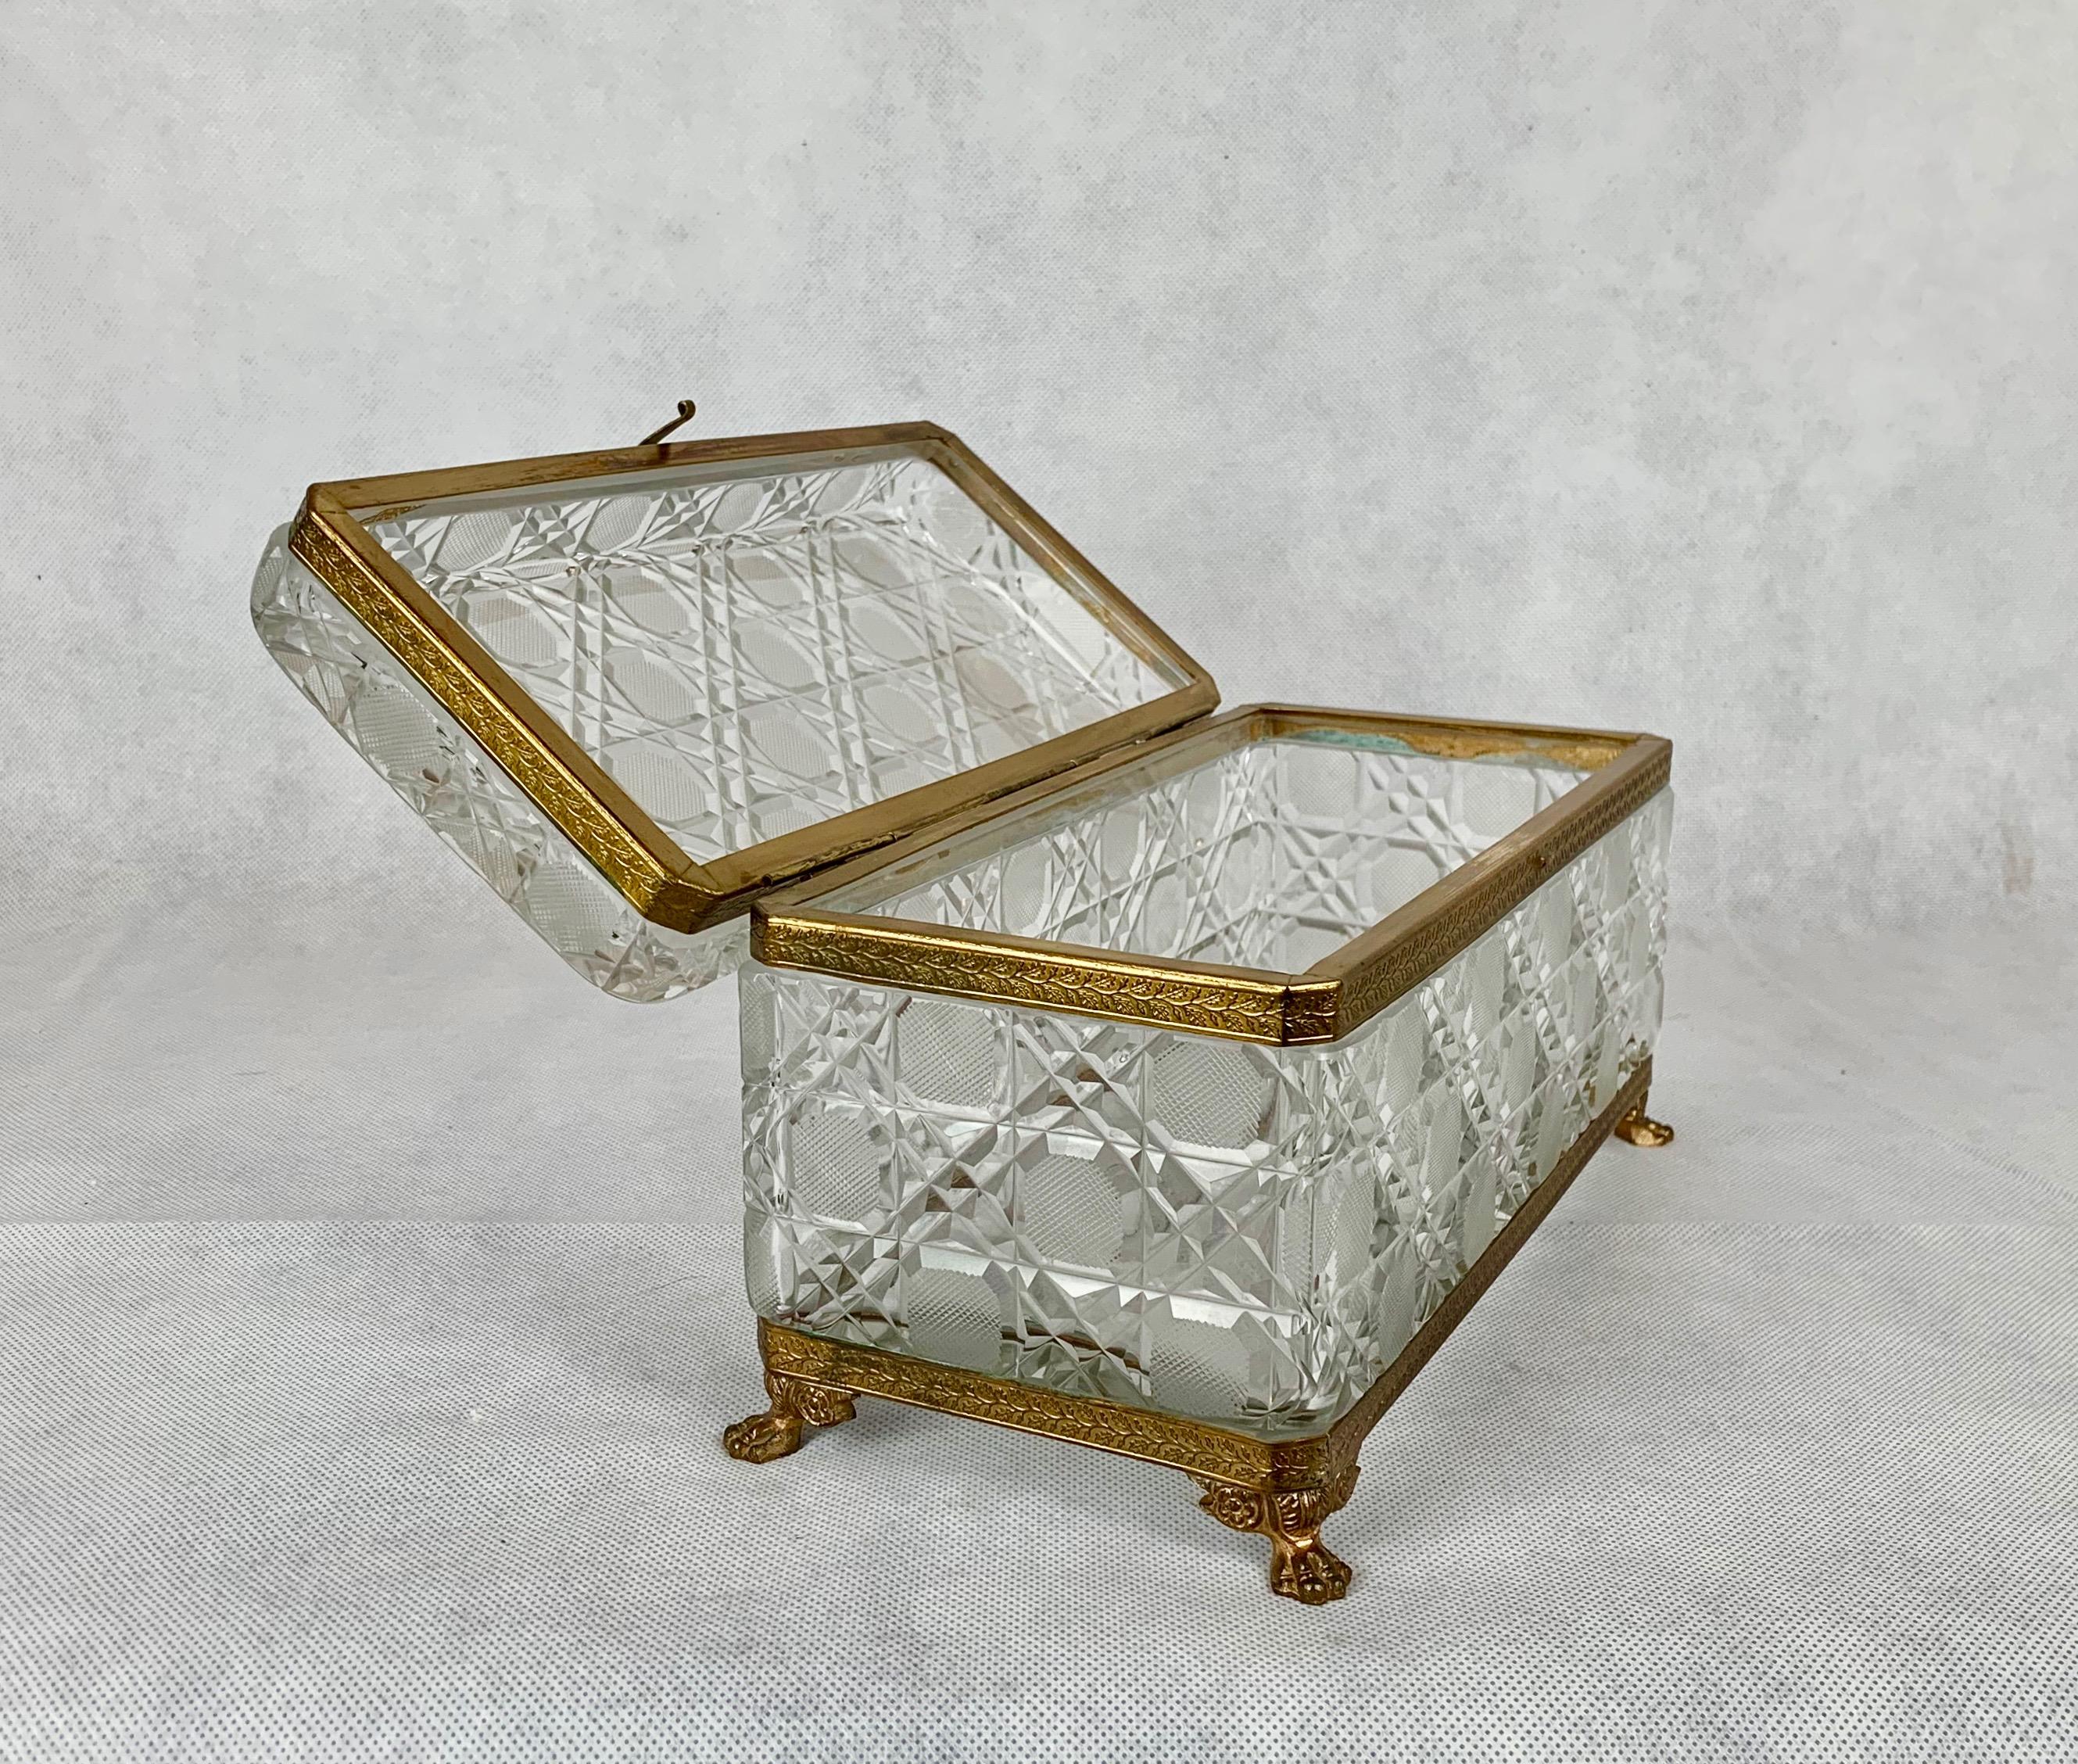 French  Large Cut Crystal Box with a Gilt Frame in the Cane or Hobnail Pattern